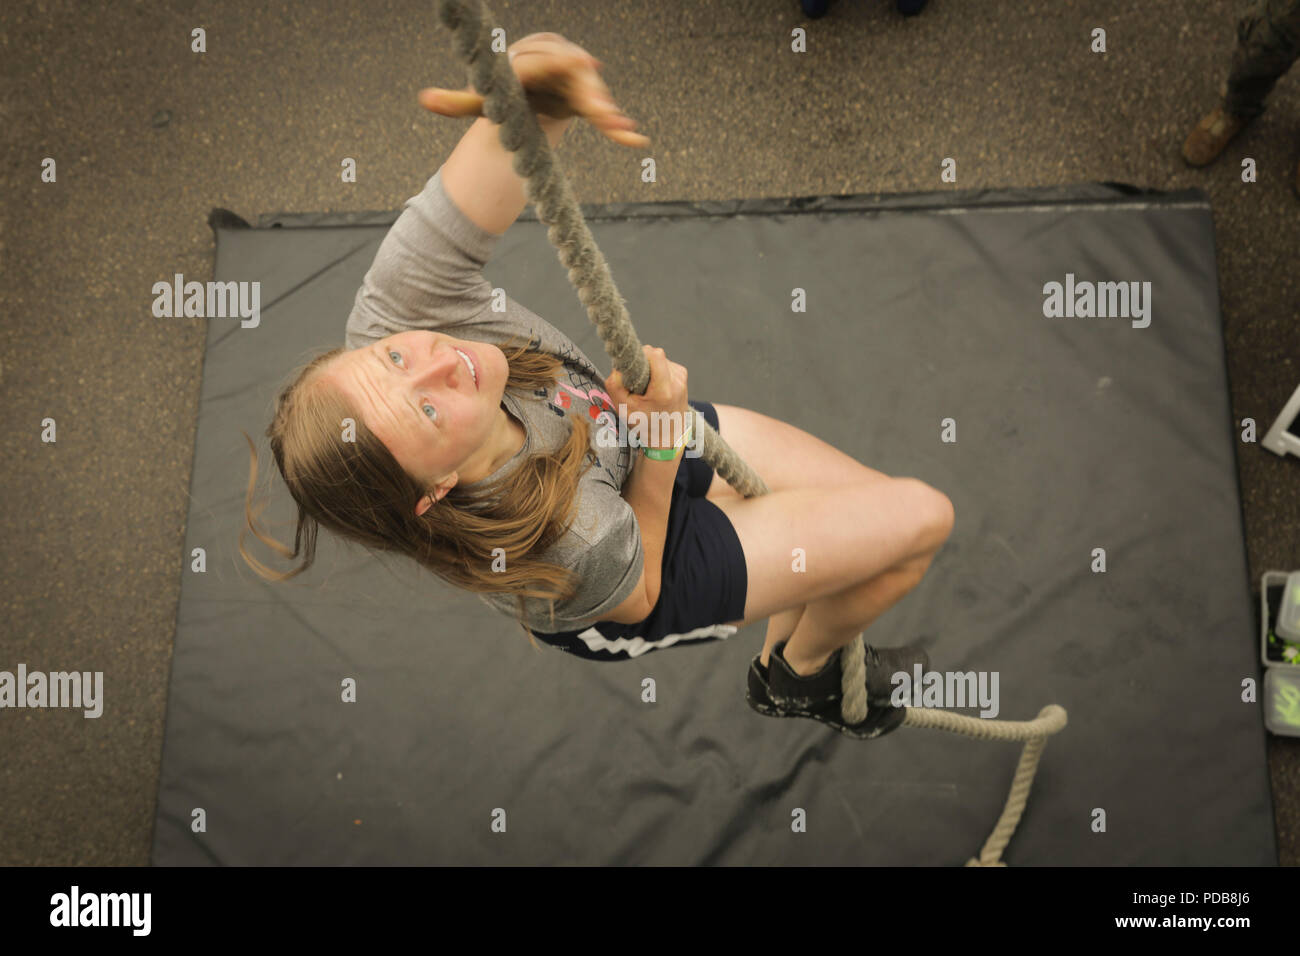 MADISON, Wisconsin – Jena Peters, a native of Sioux City, Iowa, climbs the  rope at the Marine Corps Battles Won Challenge trailer during the 2018  Reebok CrossFit Games at the Alliant Energy